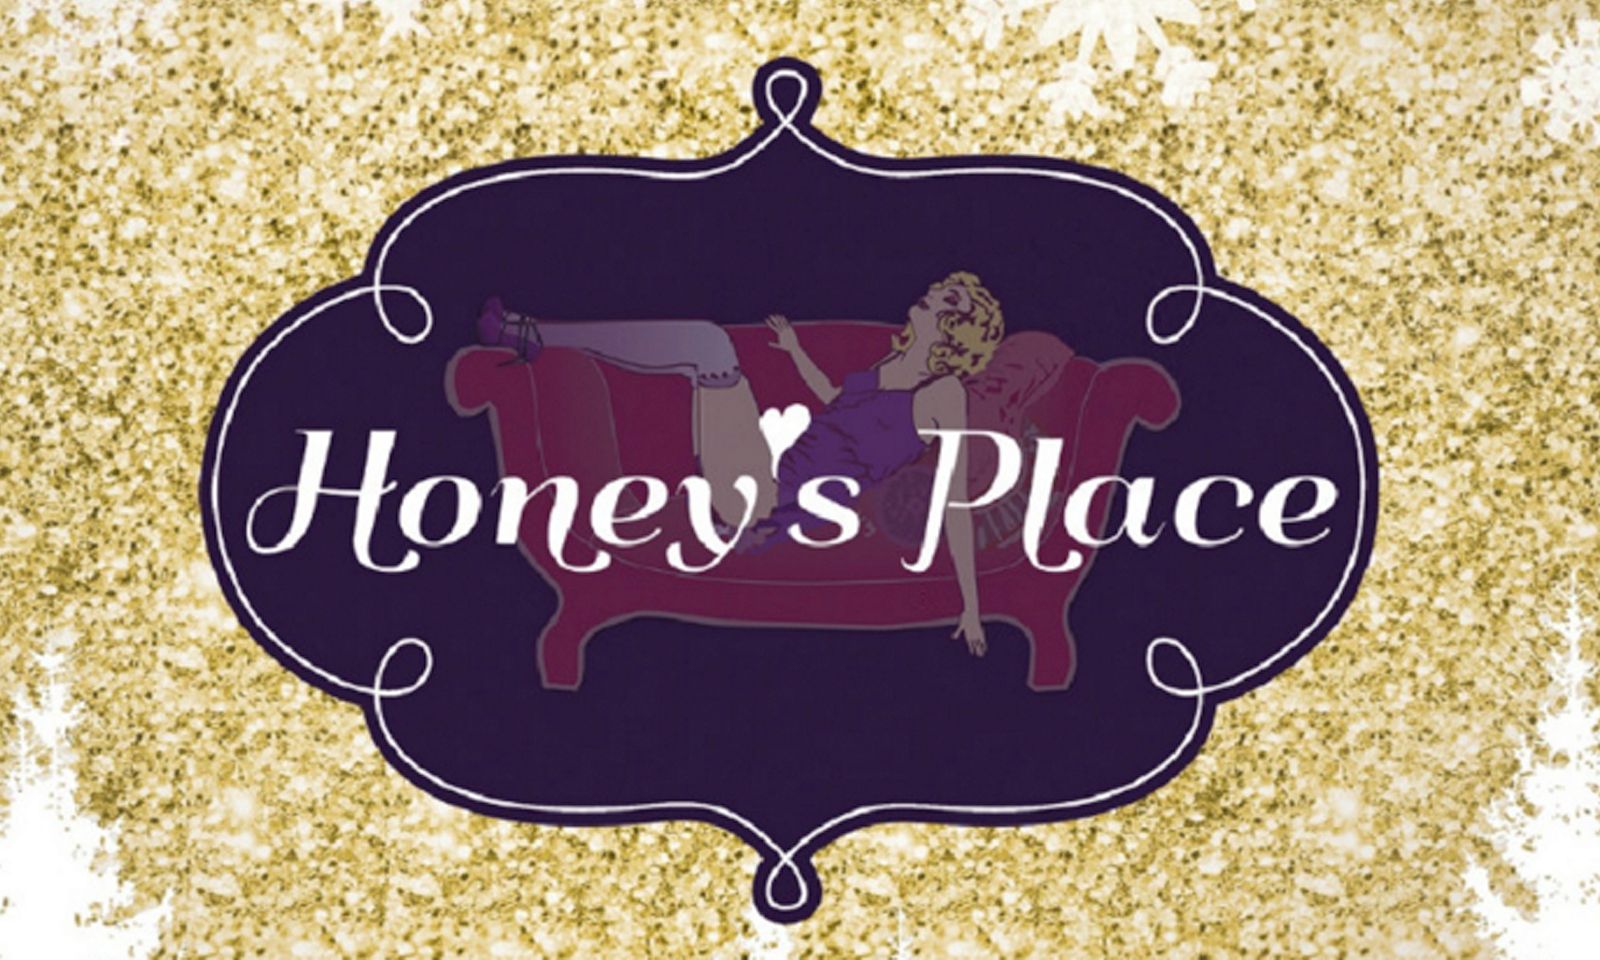 Holiday Buyer’s Guide Now Available at Honey's Place 